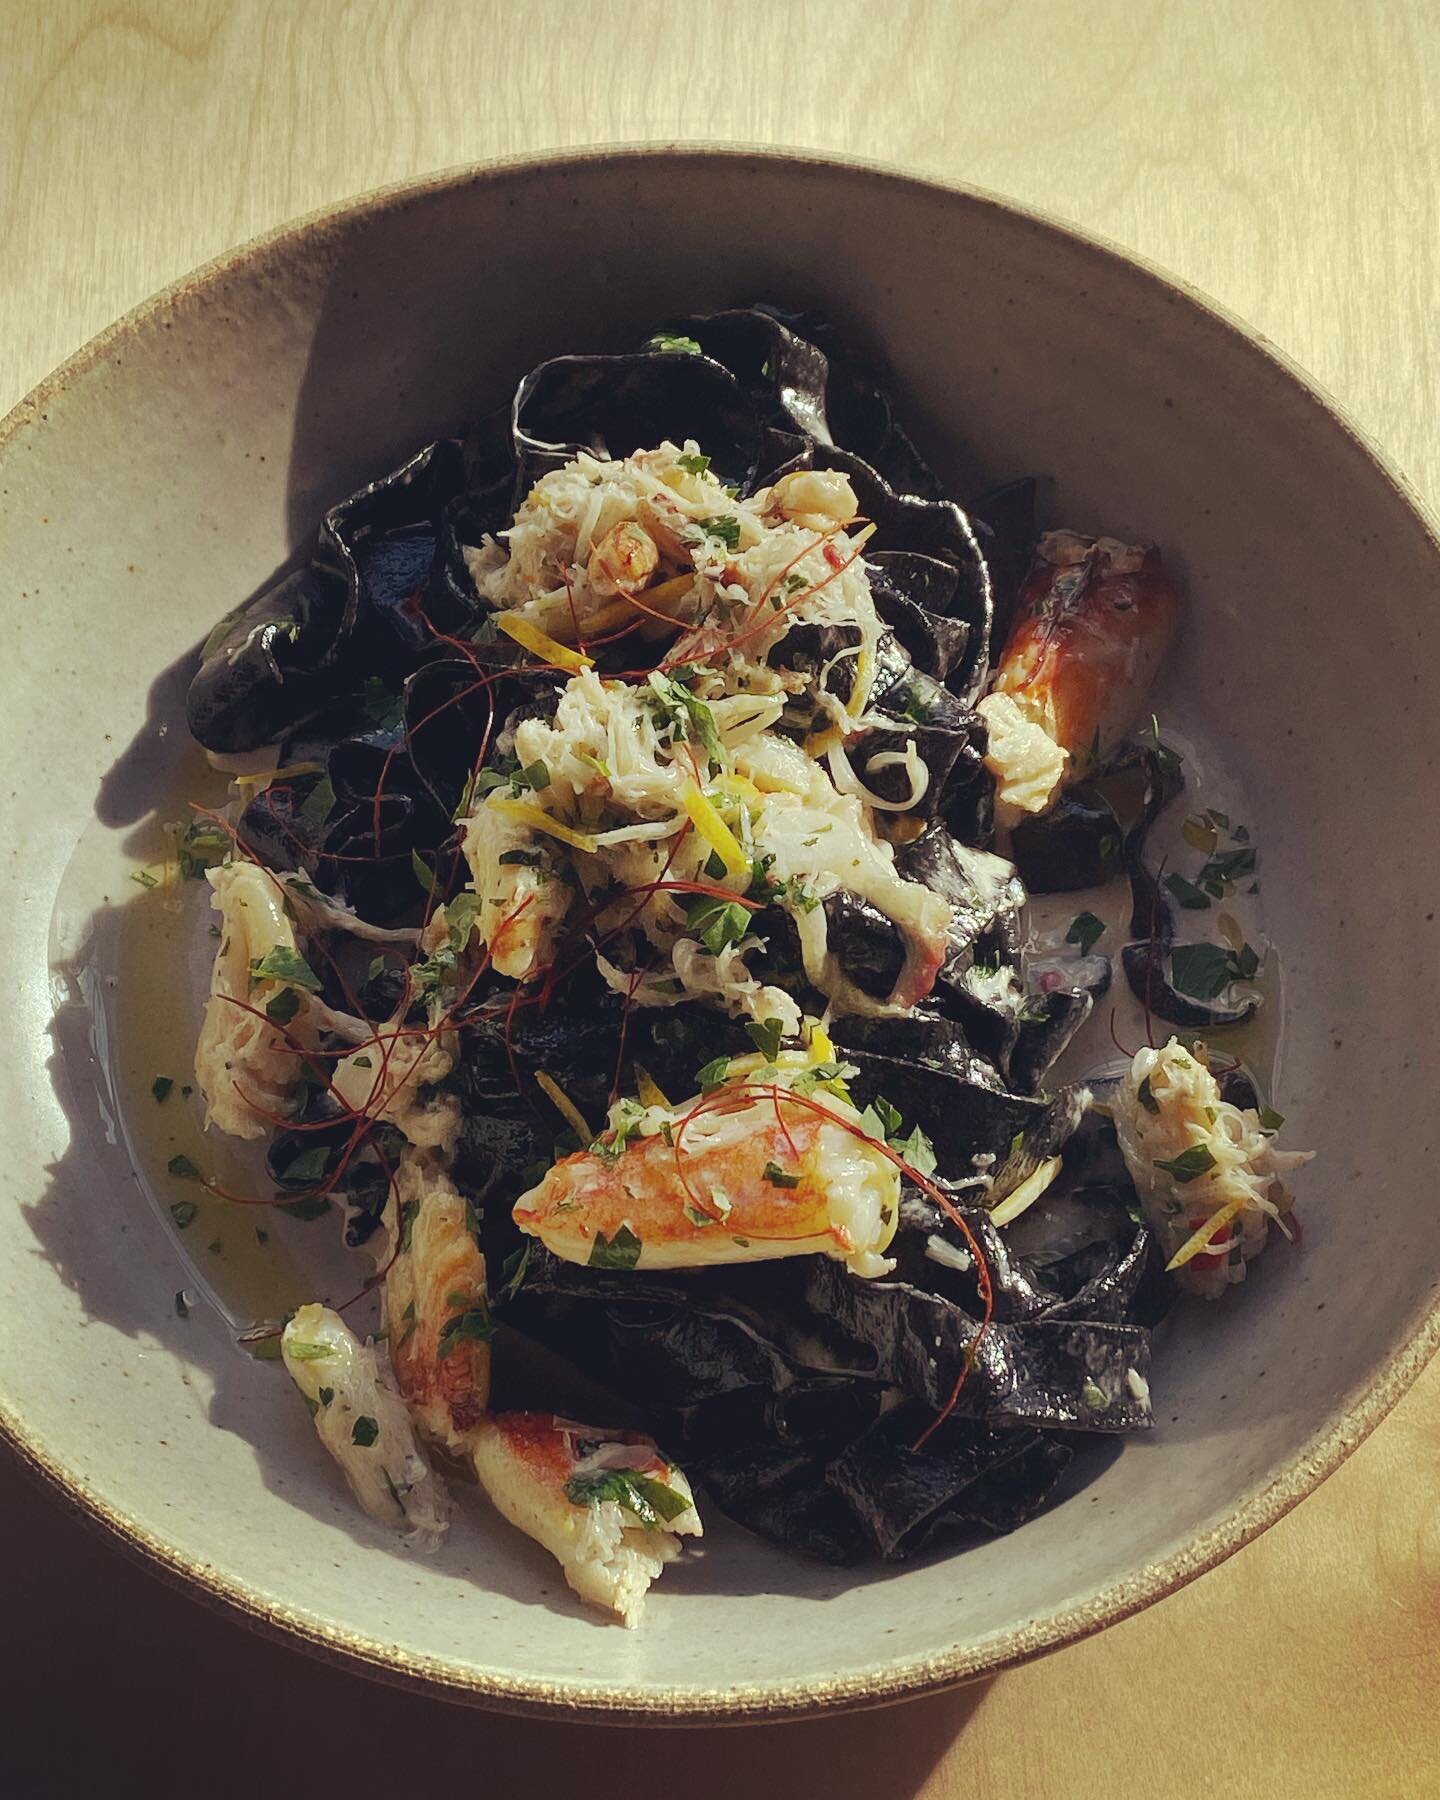 This weeks pasta special is Squid ink Tagliatelle, Dungeness crab, Meyer lemon, chili, parsley, a touch of cream and Prosecco. Treat yourself @osteria_dop #crabpasta #tagliatelle #dungenesscrab #meyerlemon #slowfood #eugeneoregon